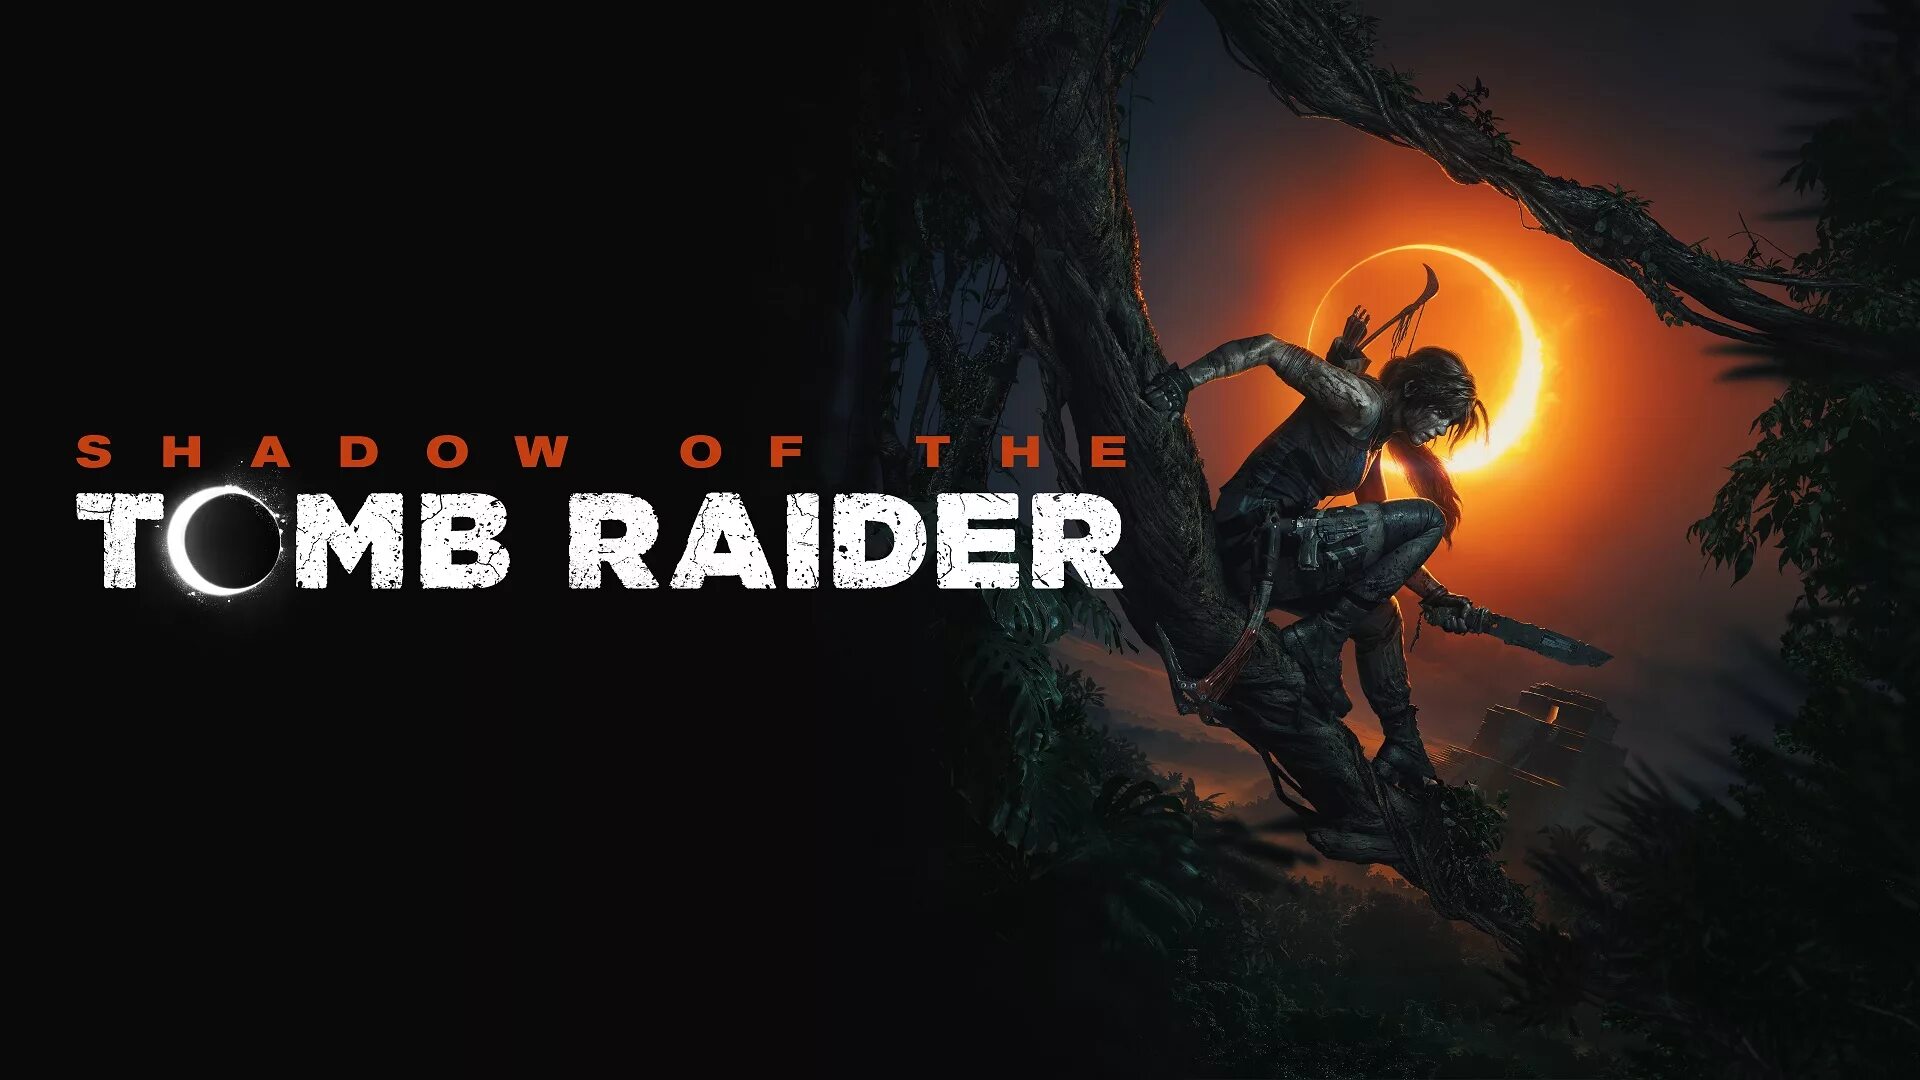 Tom shadow. Игра Shadow of the Tomb Raider 2018. Том Райдер Shadow of the Tomb Raider. Shadow of the Tomb Raider Постер.